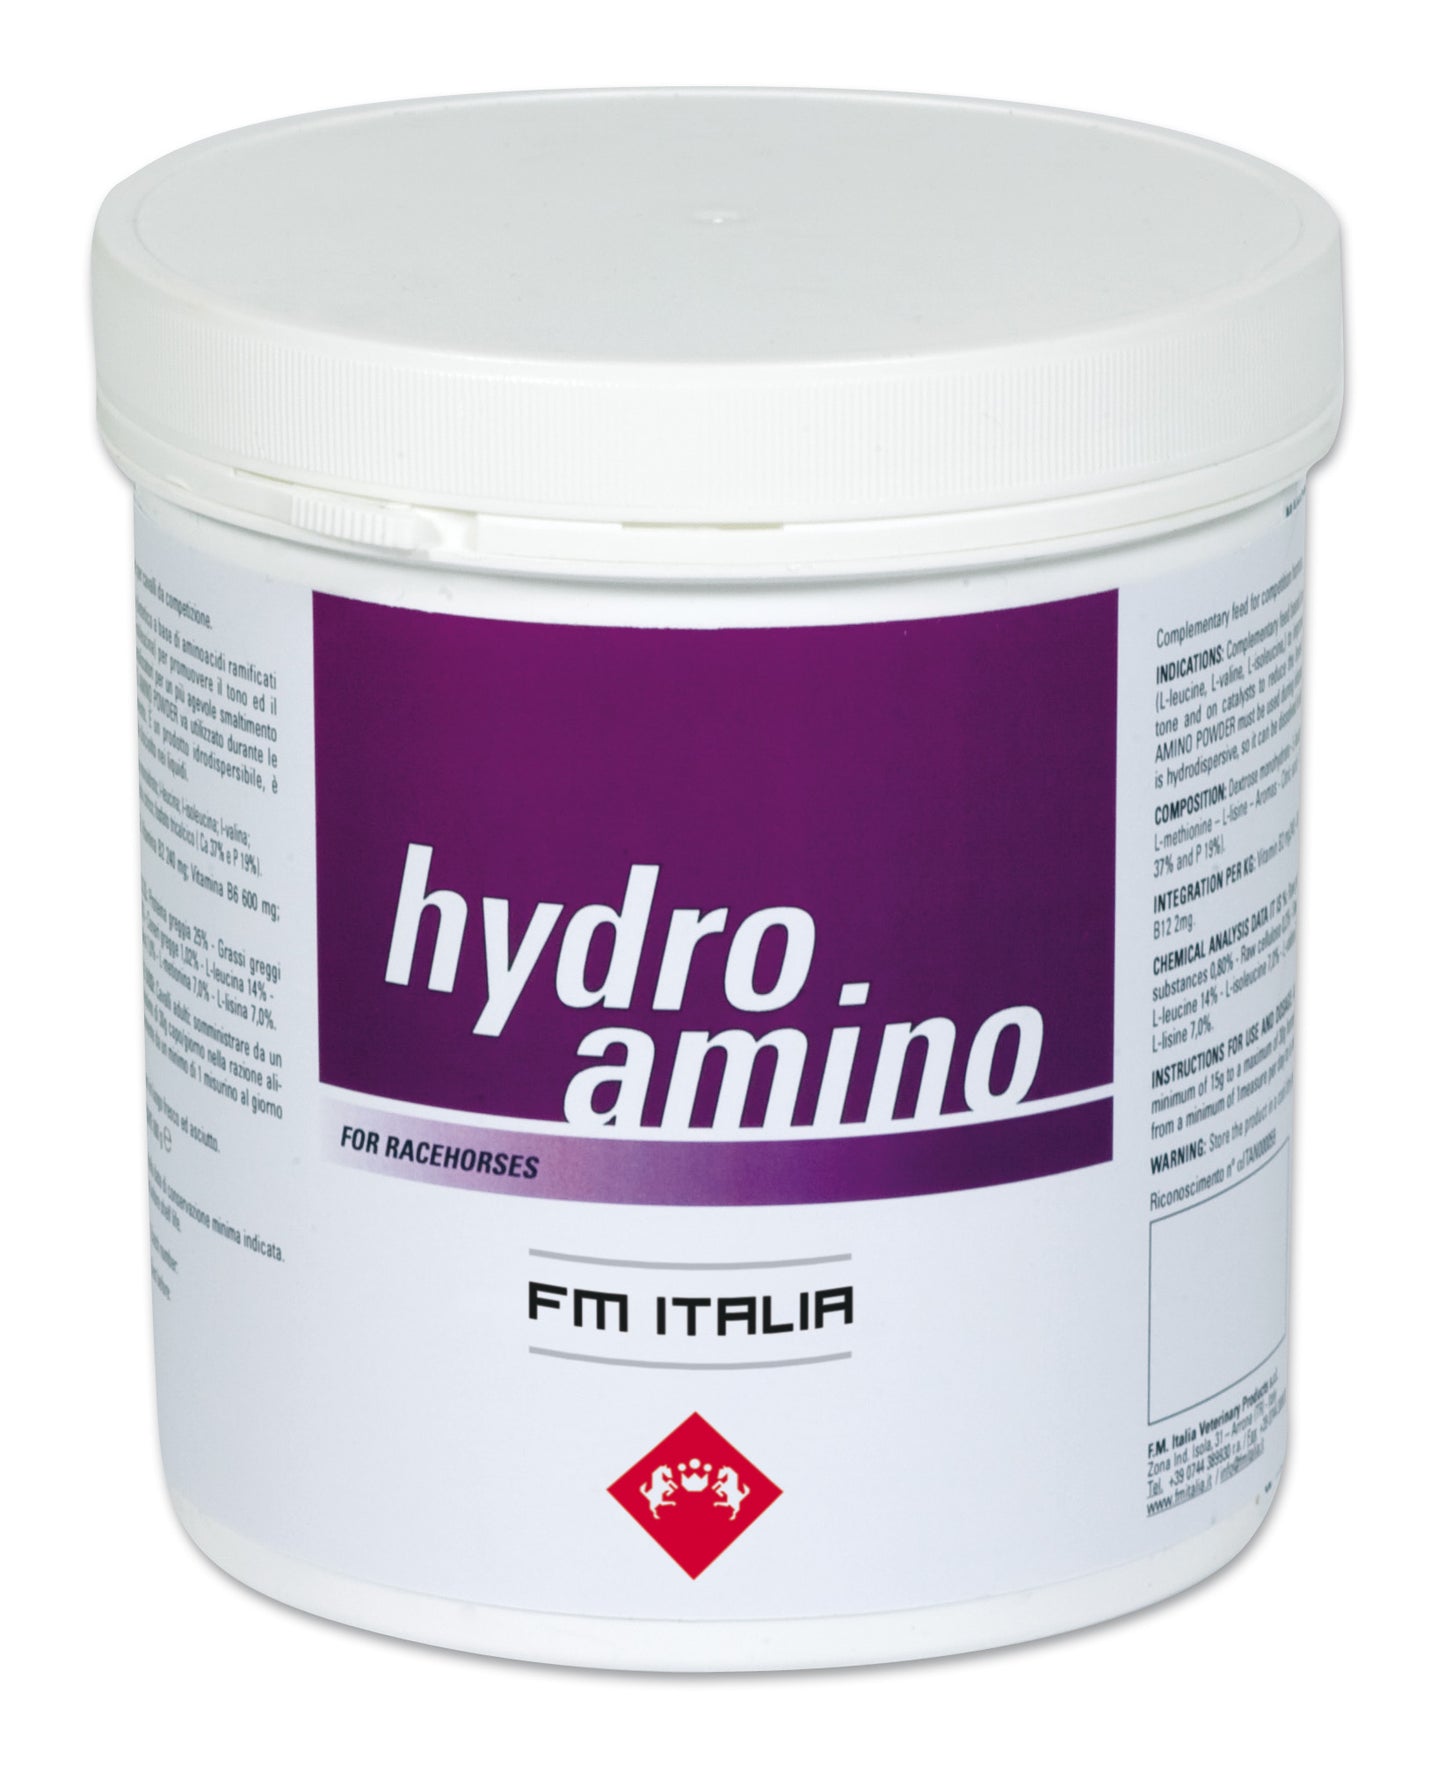 HYDRO AMINO | Horse Powder Supplement with Branched Amino Acids